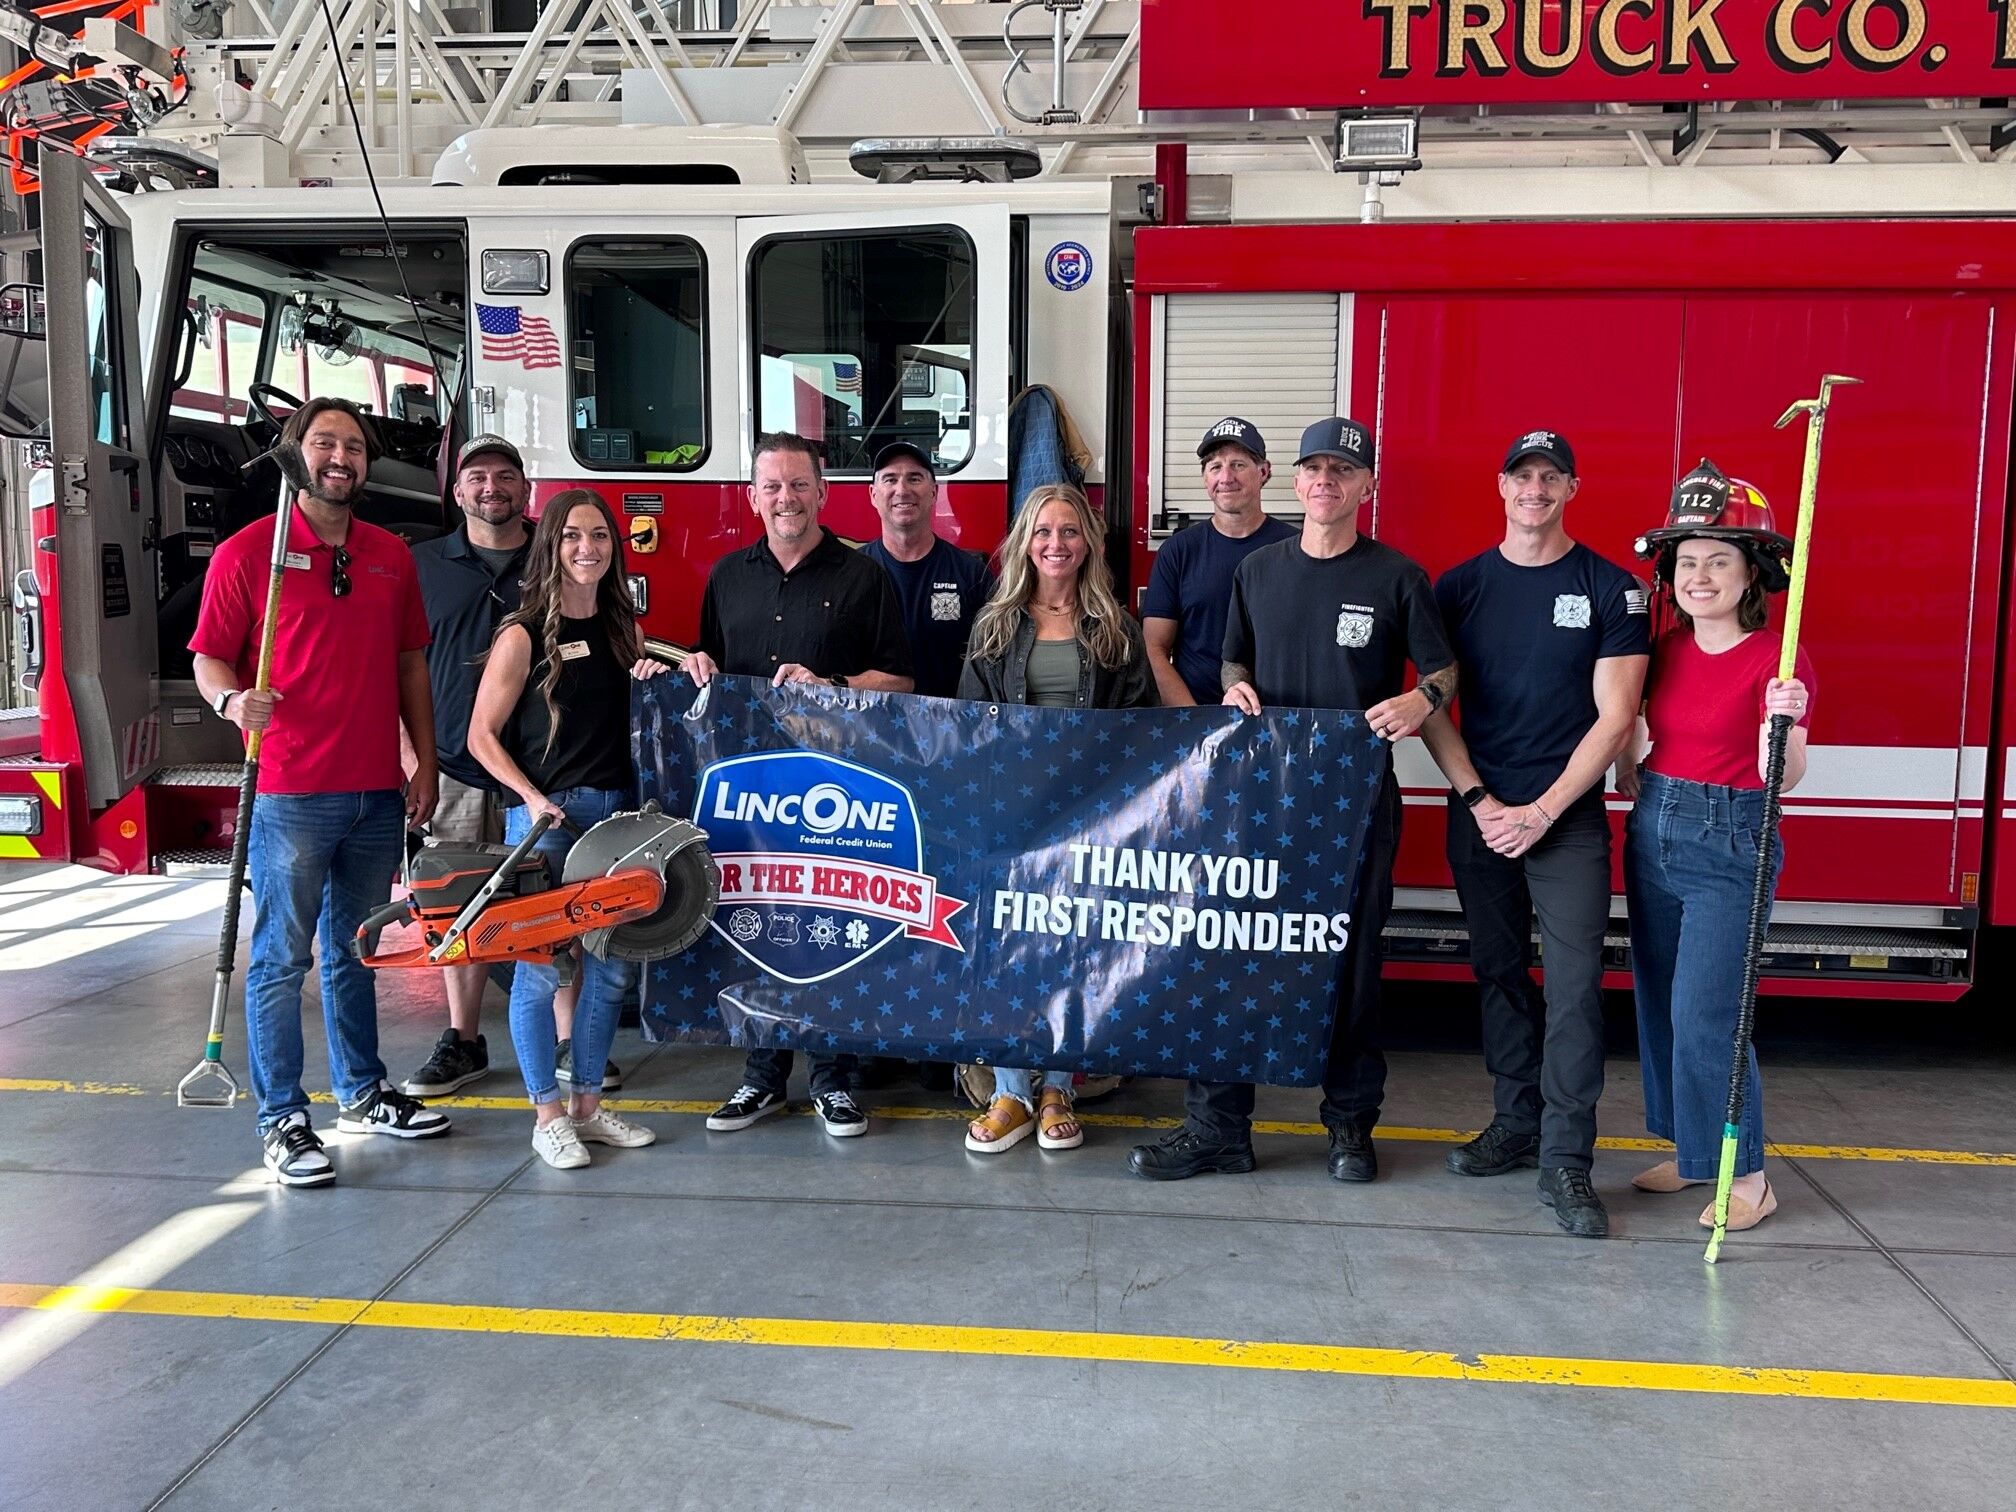 LincOne for the heroes event raising awareness for first responders, image in front of firetruck